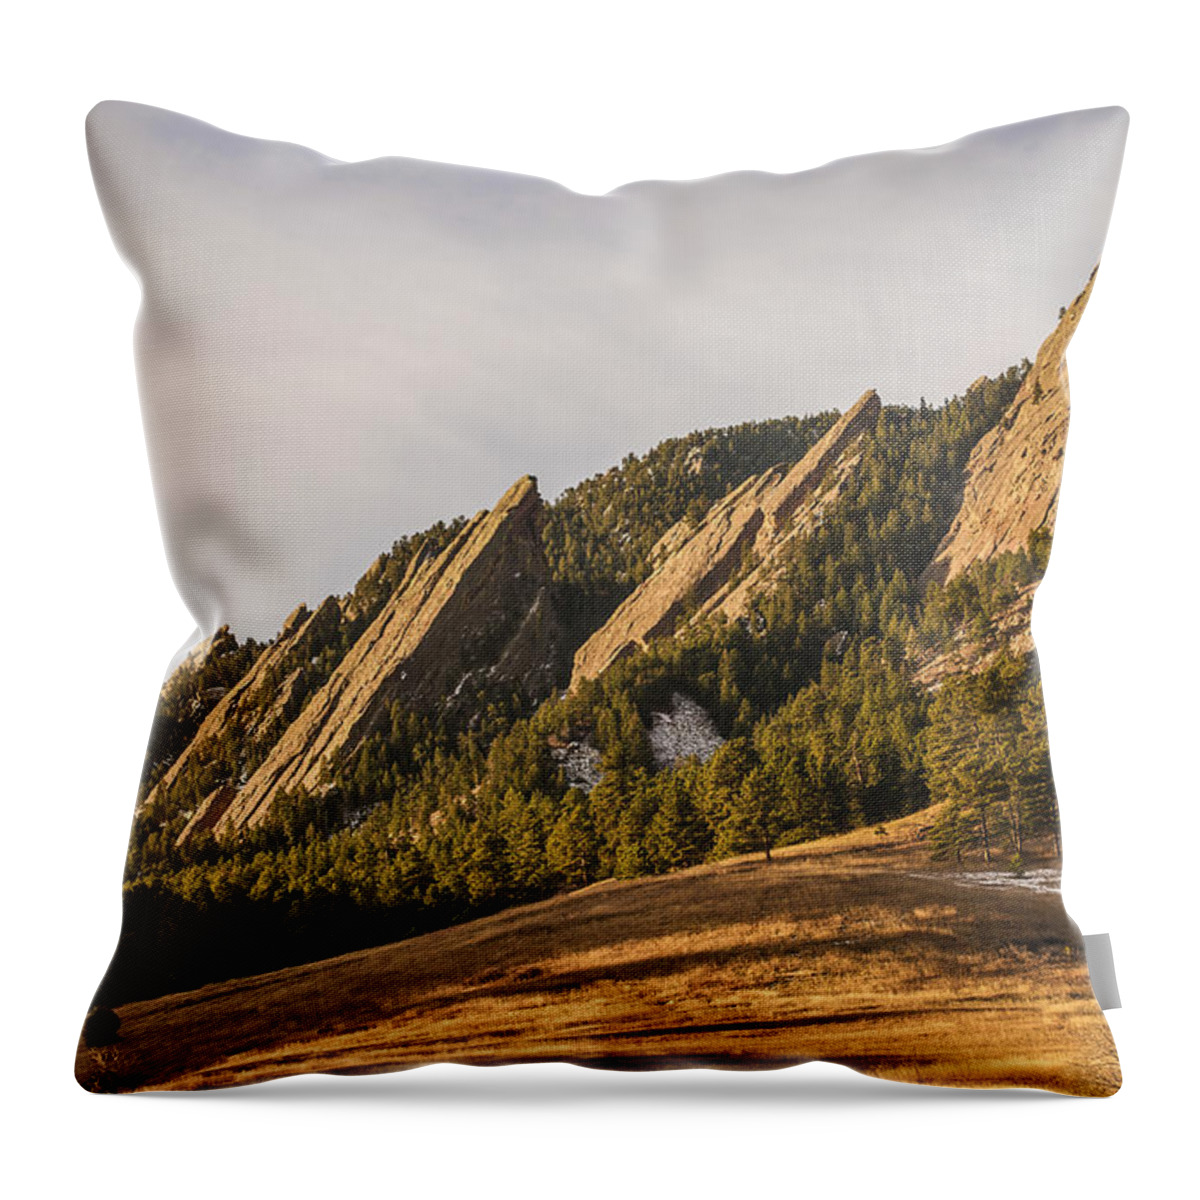 Flatirons Throw Pillow featuring the photograph The Flatirons 2 by Aaron Spong